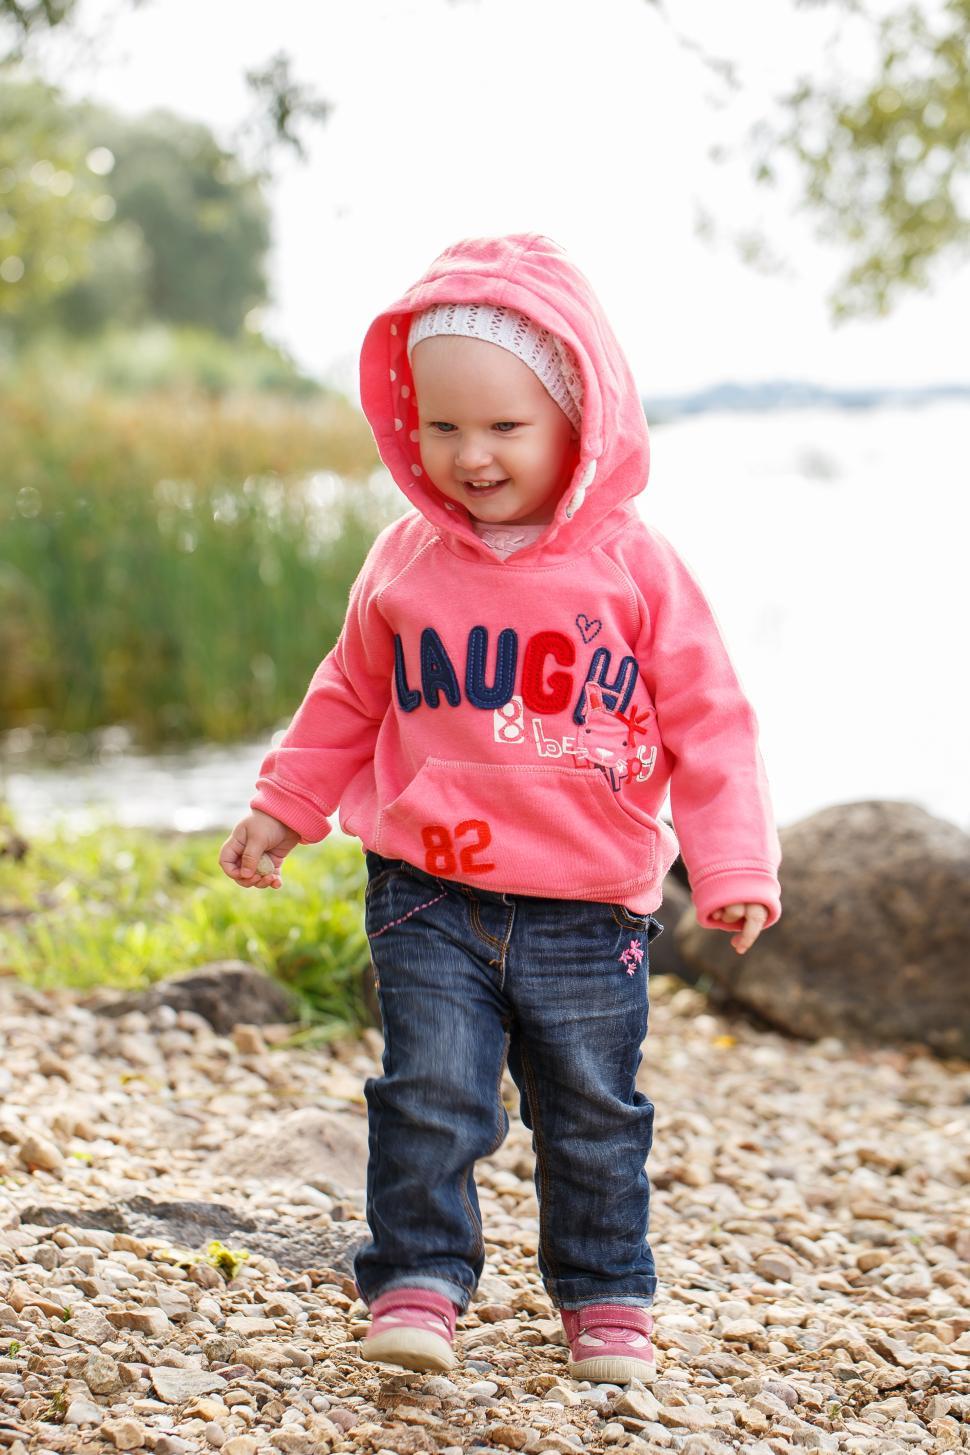 Free Image of Adorable girl by the river 